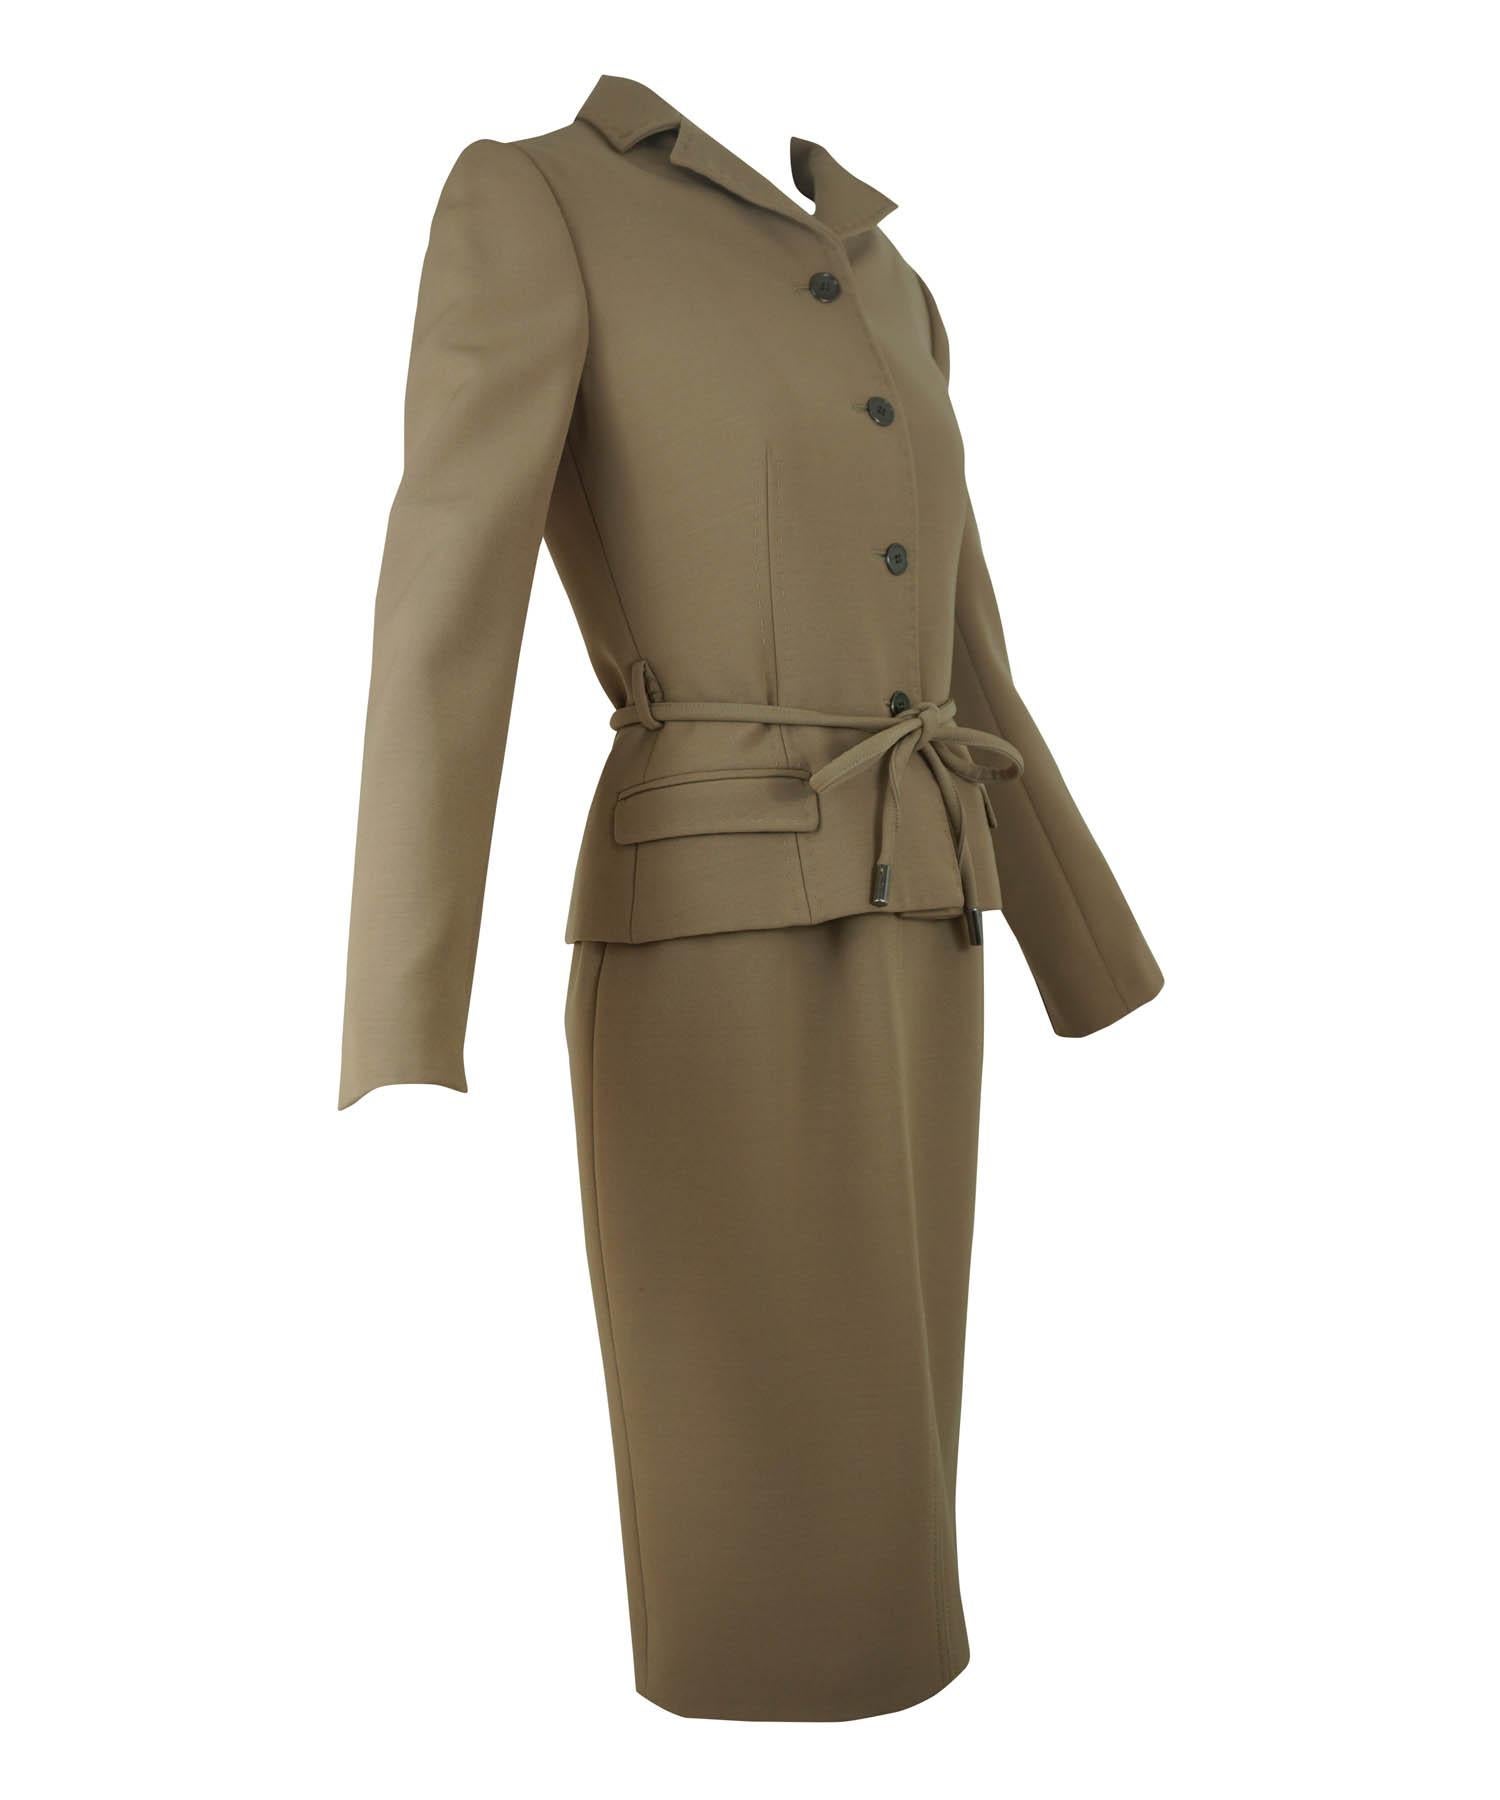 Dolce & Gabbana camel color wool suit, comprised of a sleeveless dress and belted jacket with a self fabric tie belt at waist. Set features signature leopard lining, topstitched welted seams, fitted silhouette and a concealed rear zipper on dress.